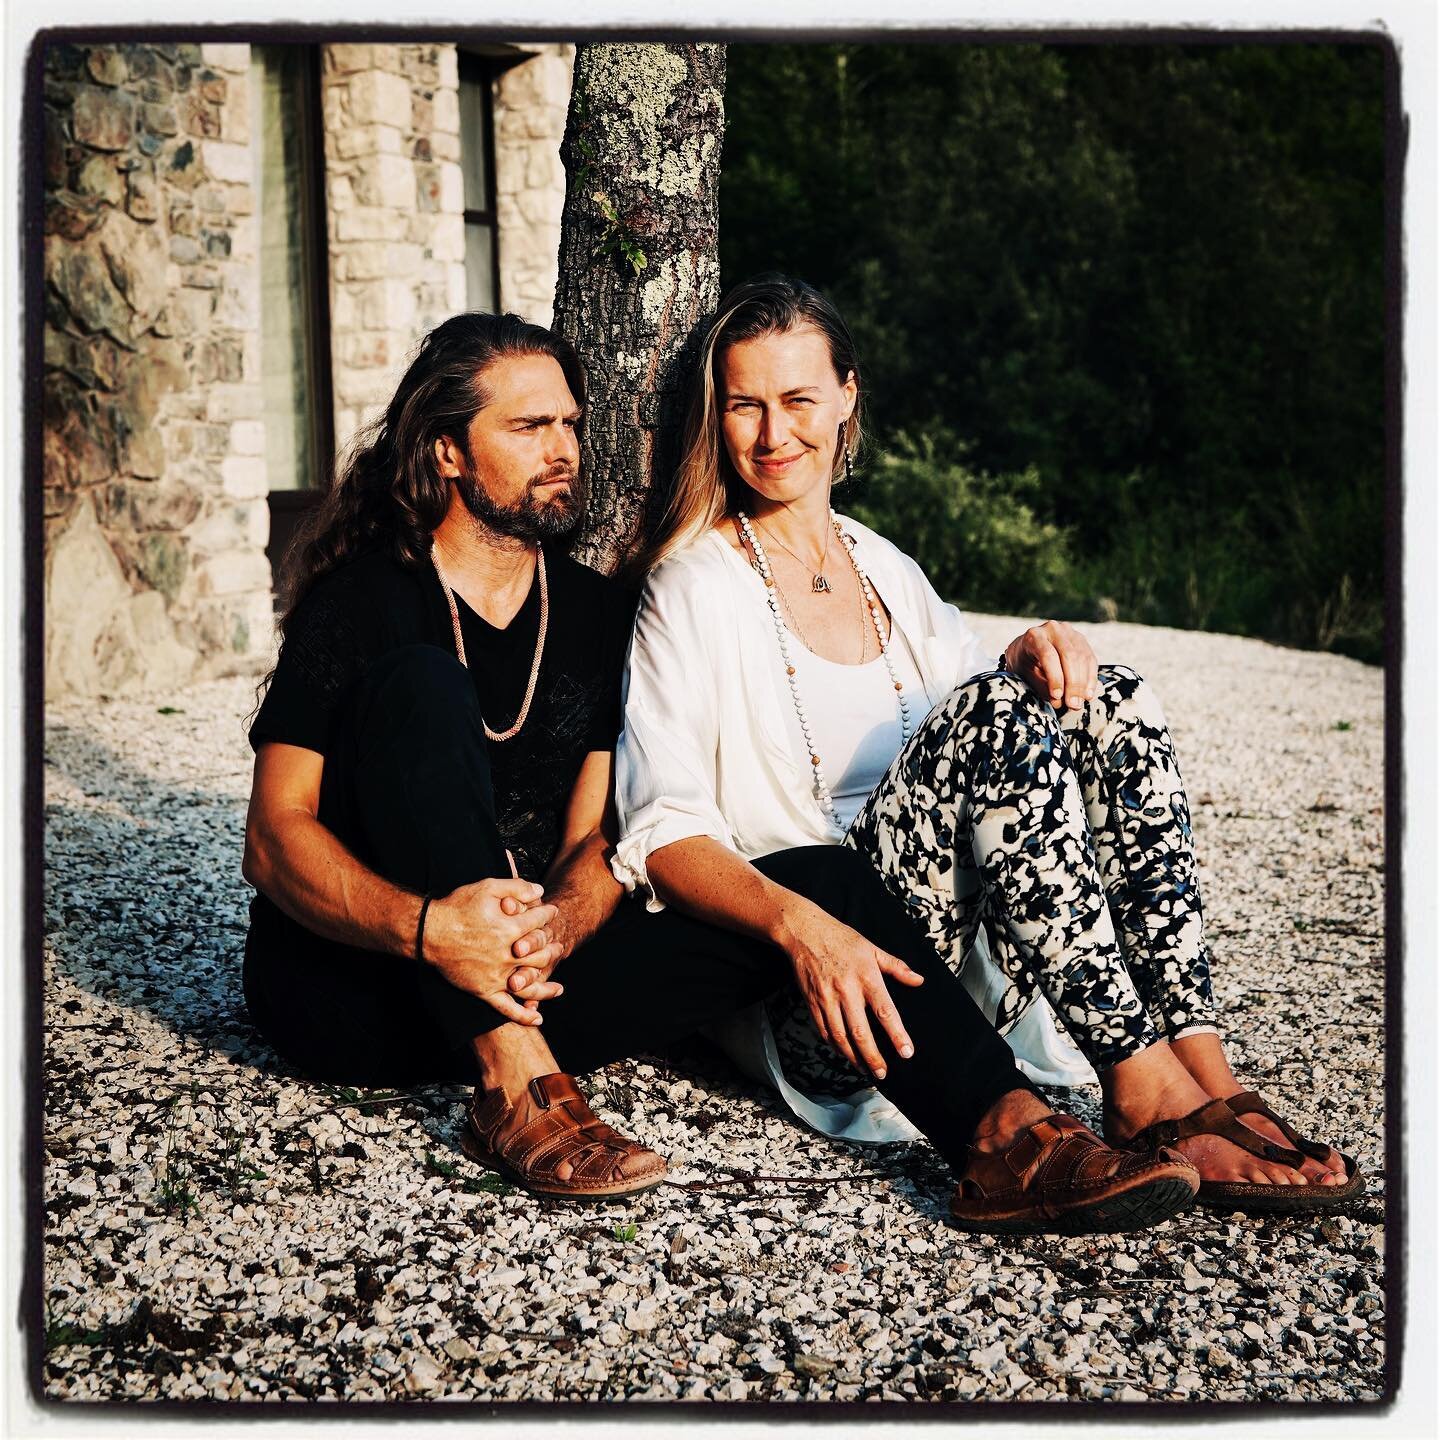 Becky and I in the middle of our &lsquo;Inner Temple Awakening&rsquo; retreat in Umbria, Italy, September 30, 2020.  We have brought our prayers and powers together to create Hollow Bone Retreats. Here is a little bit of what to expect:

Hollow Bone 